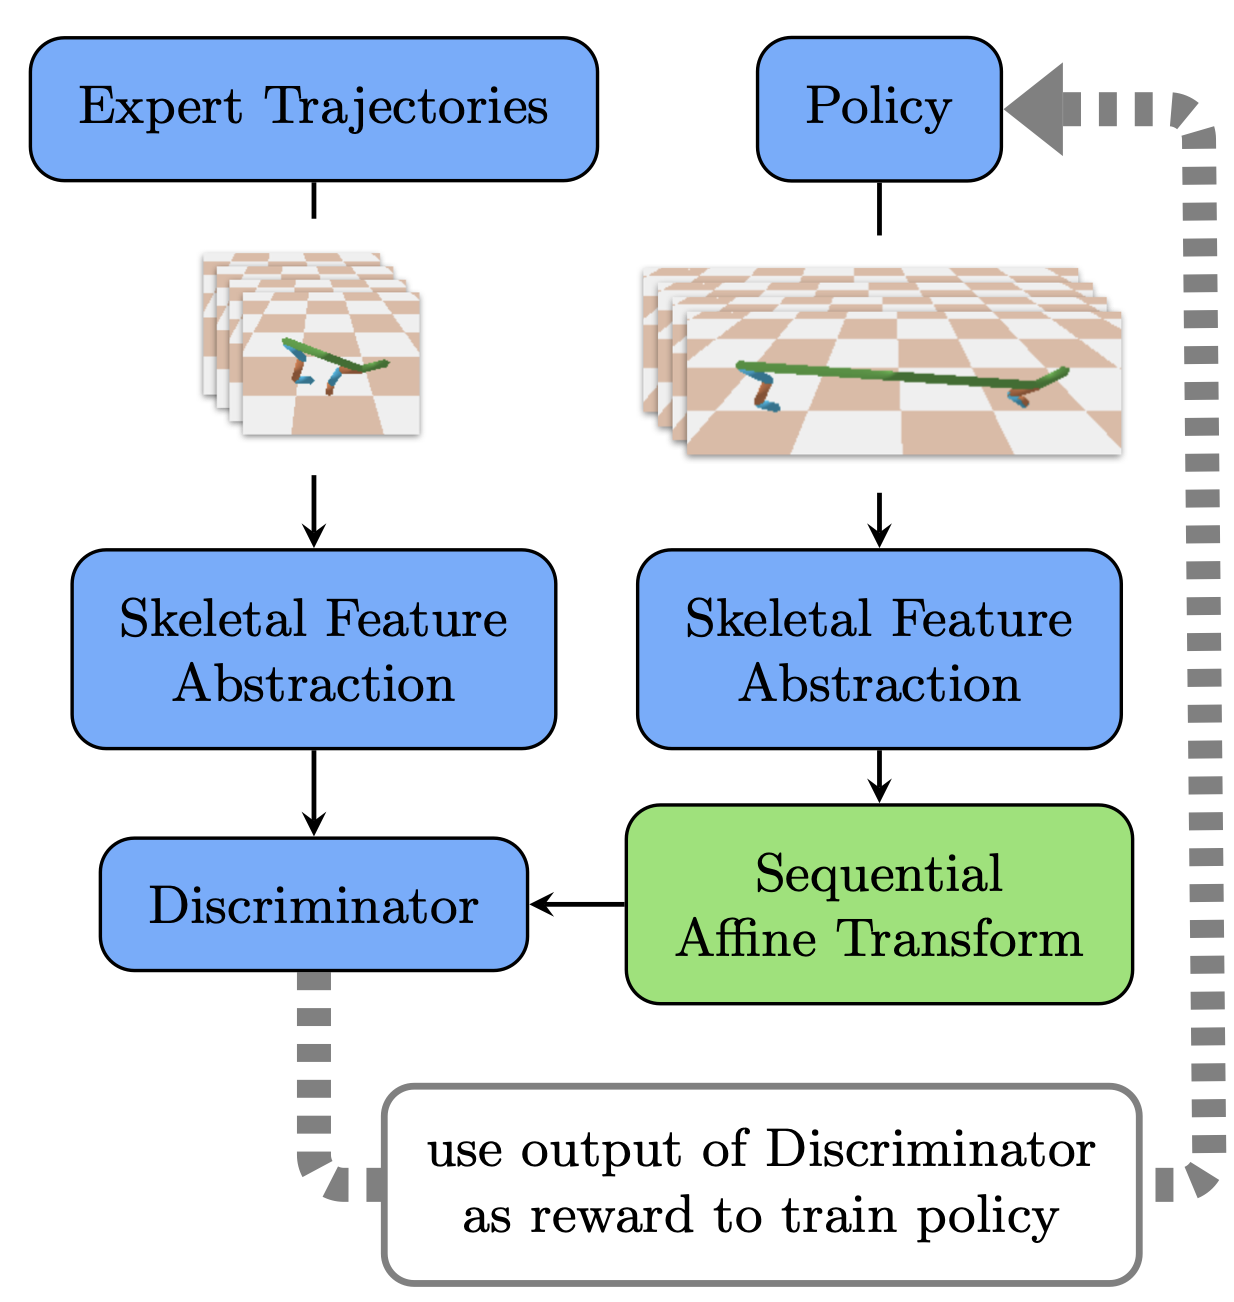 Skeletal Feature Compensation for Imitation Learning with Embodiment Mismatch